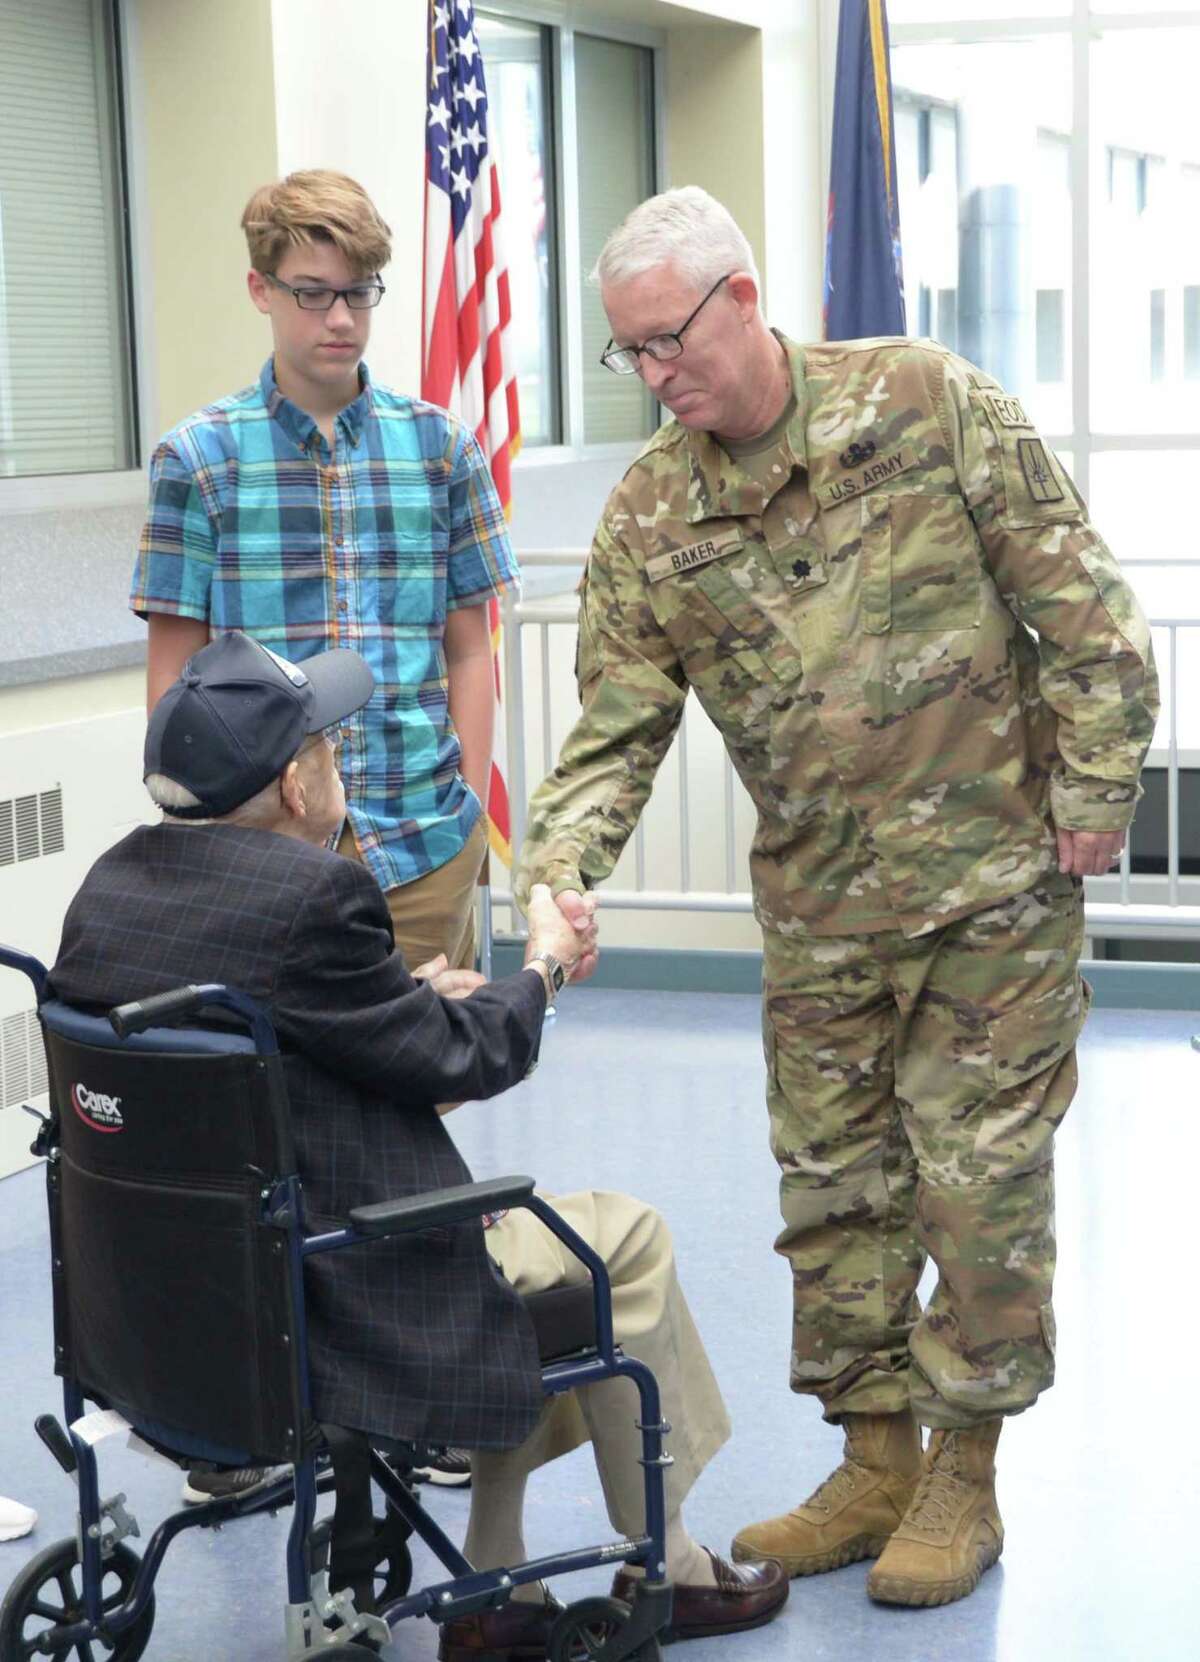 New York Army National Guard Lt. Colonel Doug Baker is congratulated on his promotion by his father, World War II Army Air Forces veteran Almer B. Baker, during a ceremony at New York National Guard Headquarters in Latham. One of Bakeras sonas looks on. (New York Army National Guard)